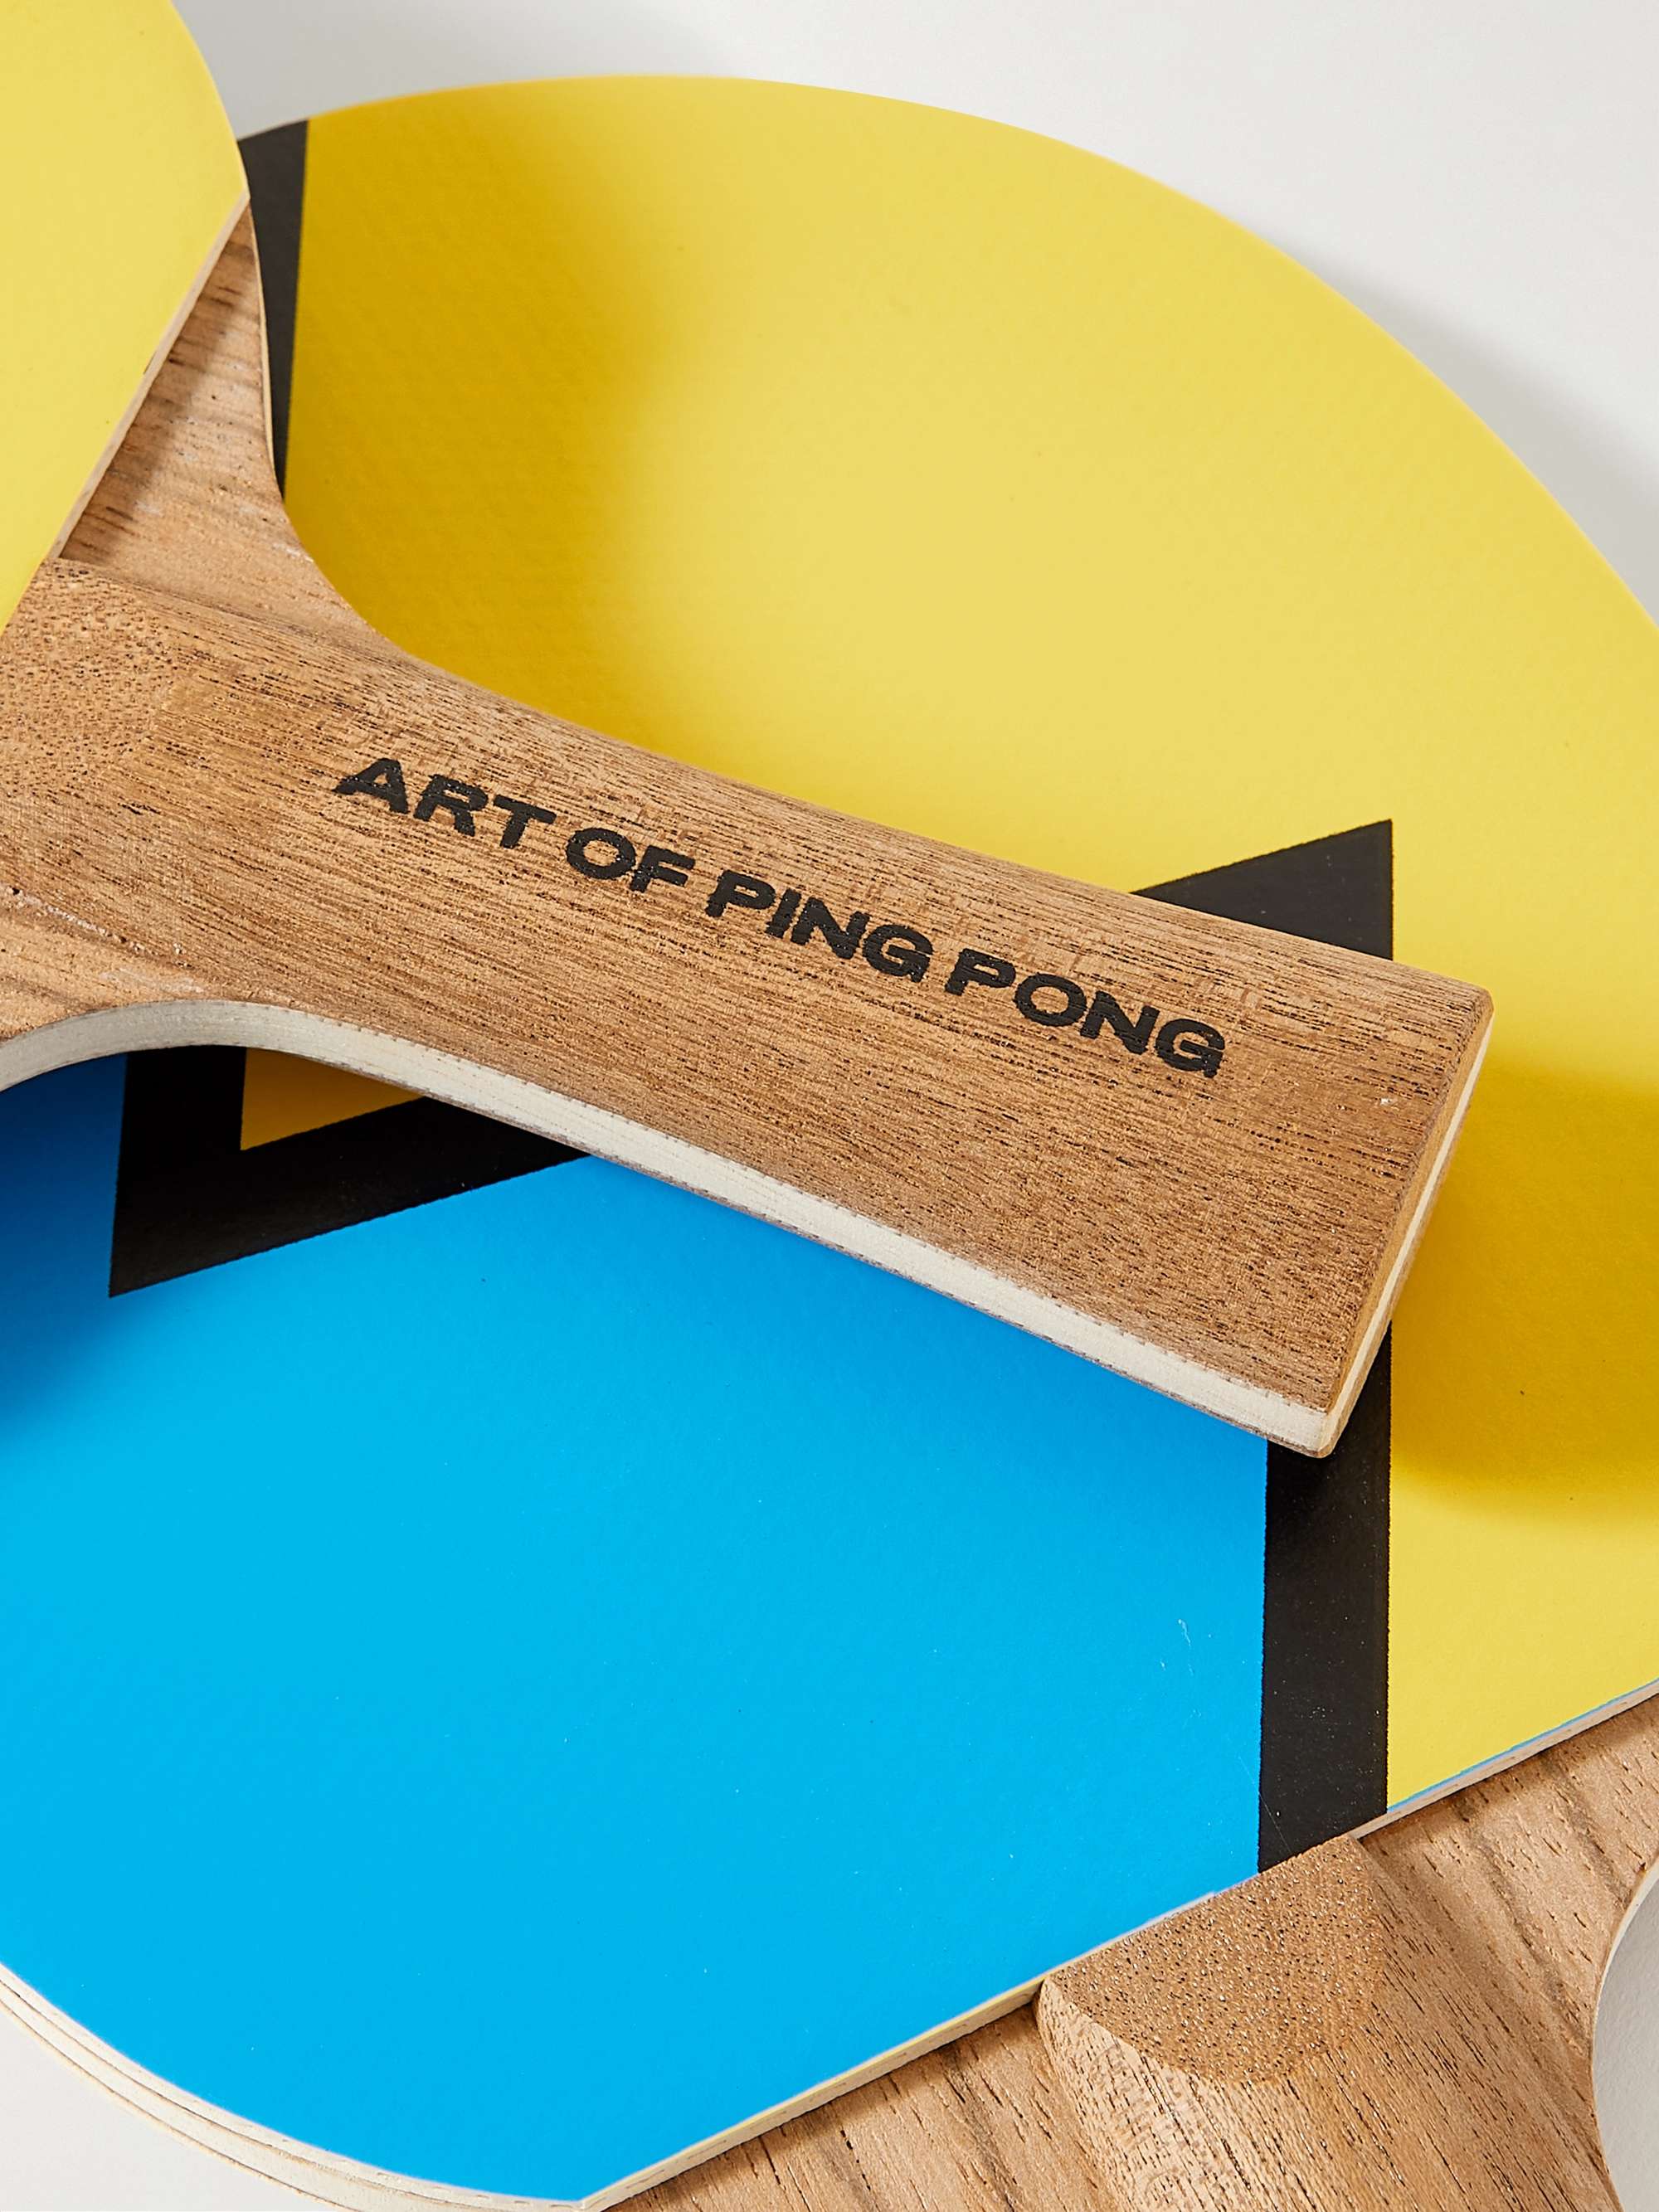 THE ART OF PING PONG Set of Two ArtBats